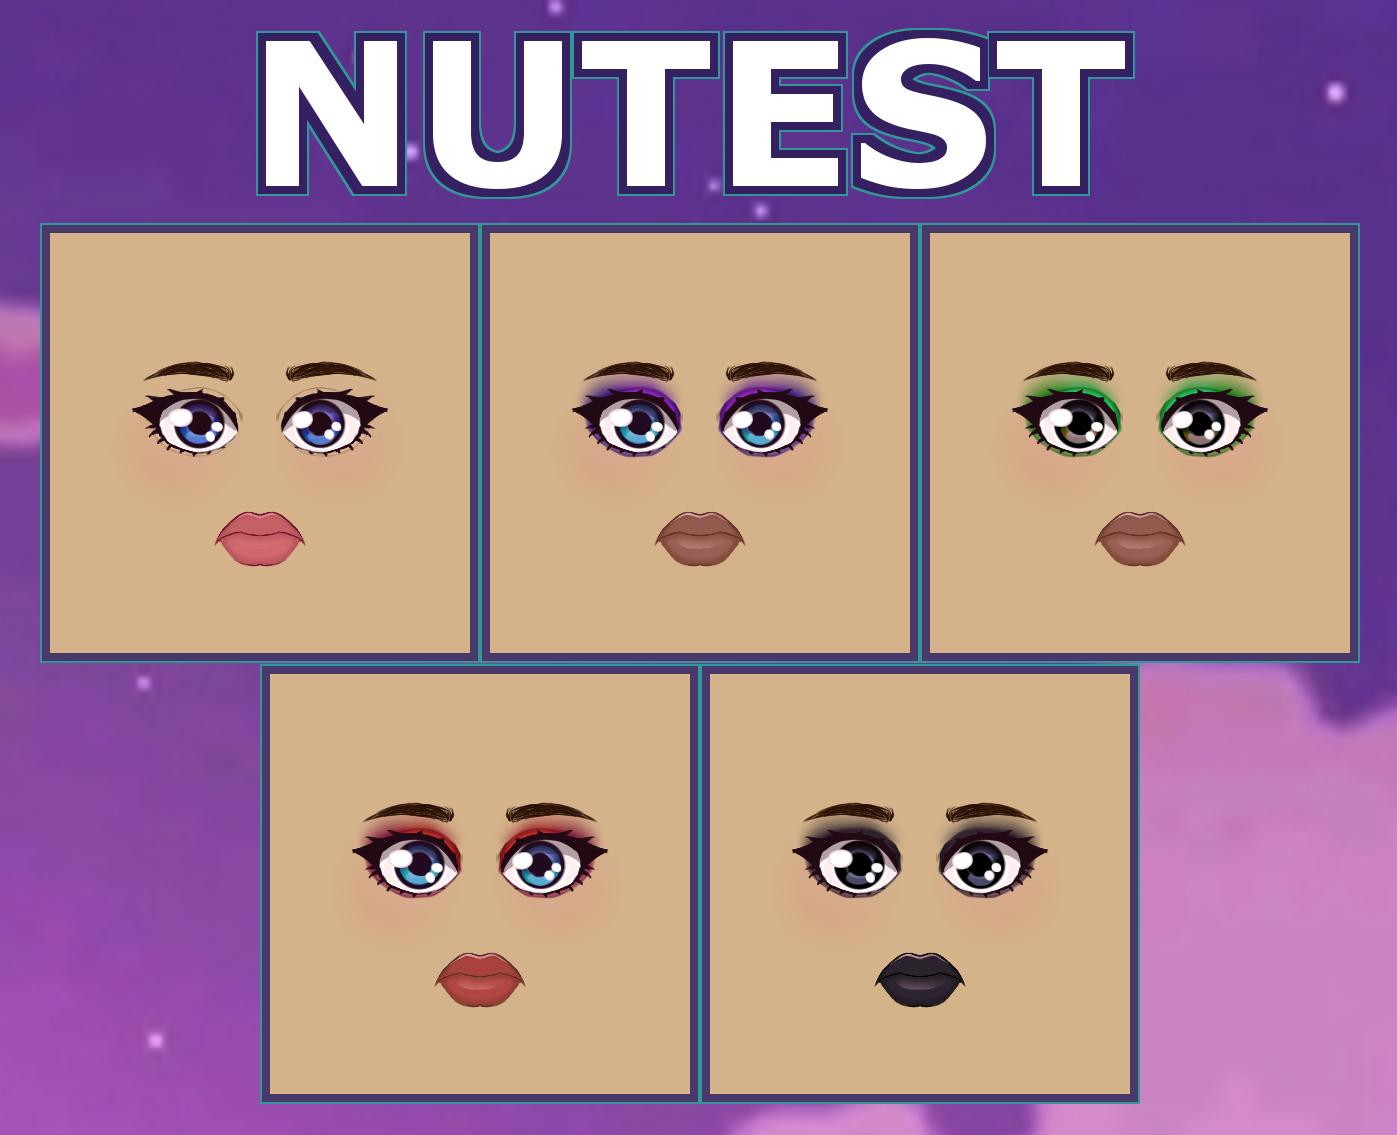 Nutest On Twitter New Face With Some Recolors Hope You Like Them Still Quite New To This Type Of Makeup Style - mugalo makeup roblox